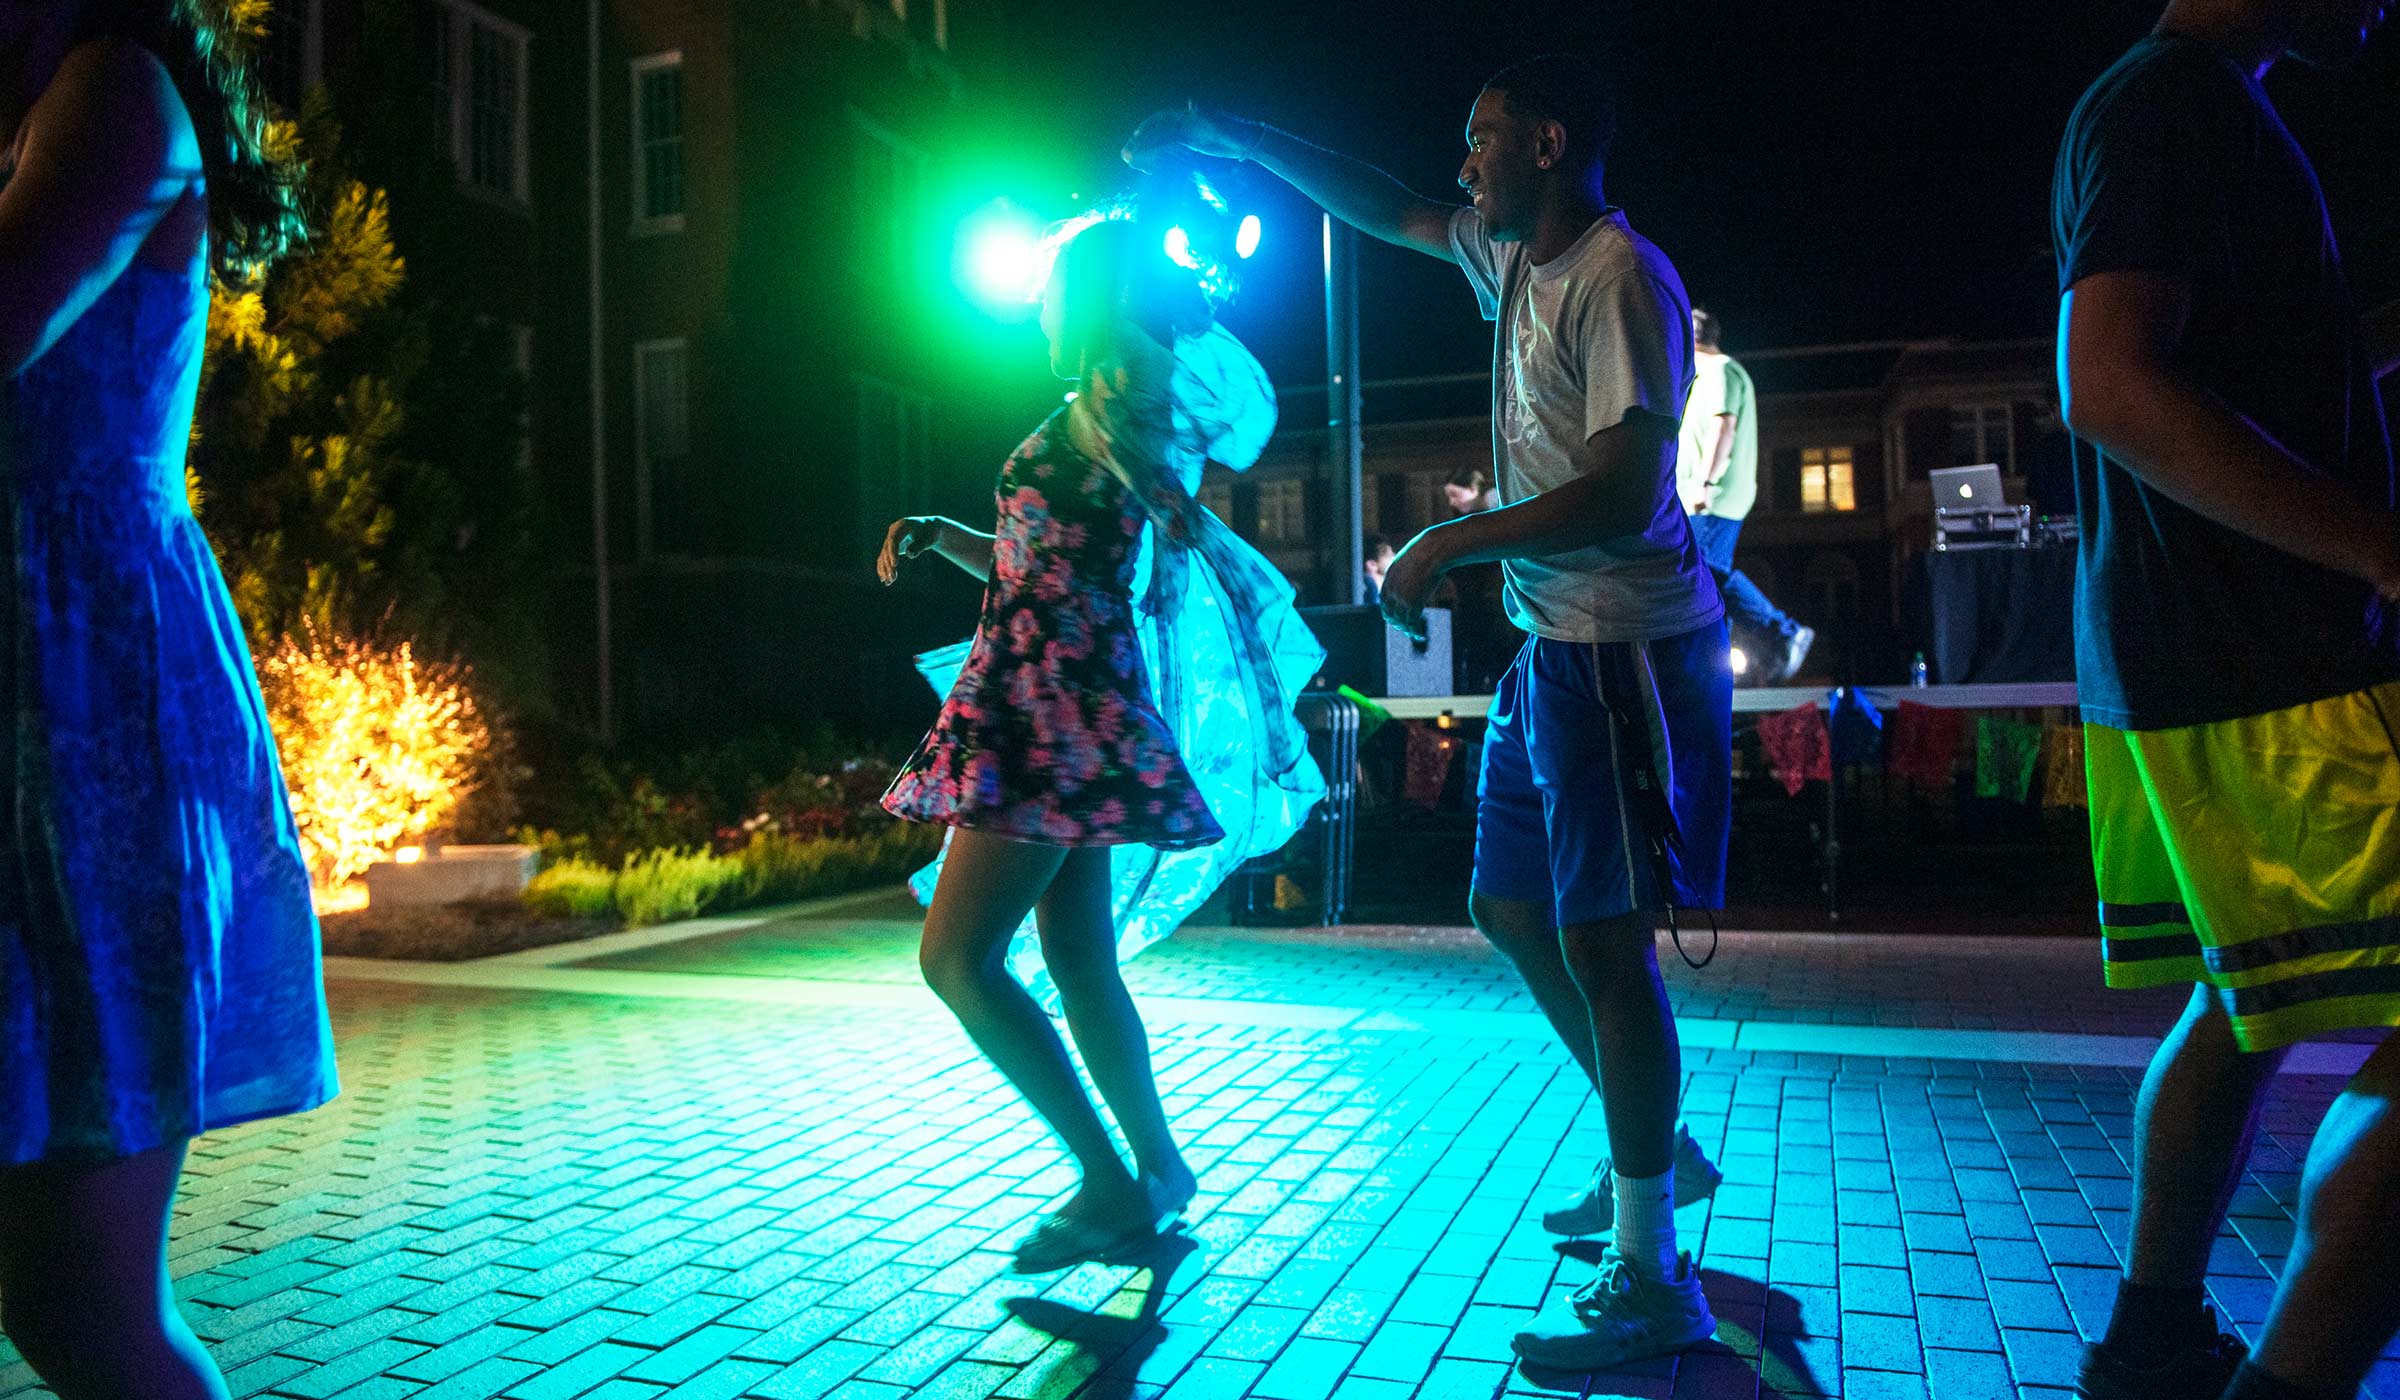 Male student twirling female student in dance move in front of stage with lights on brick plaza